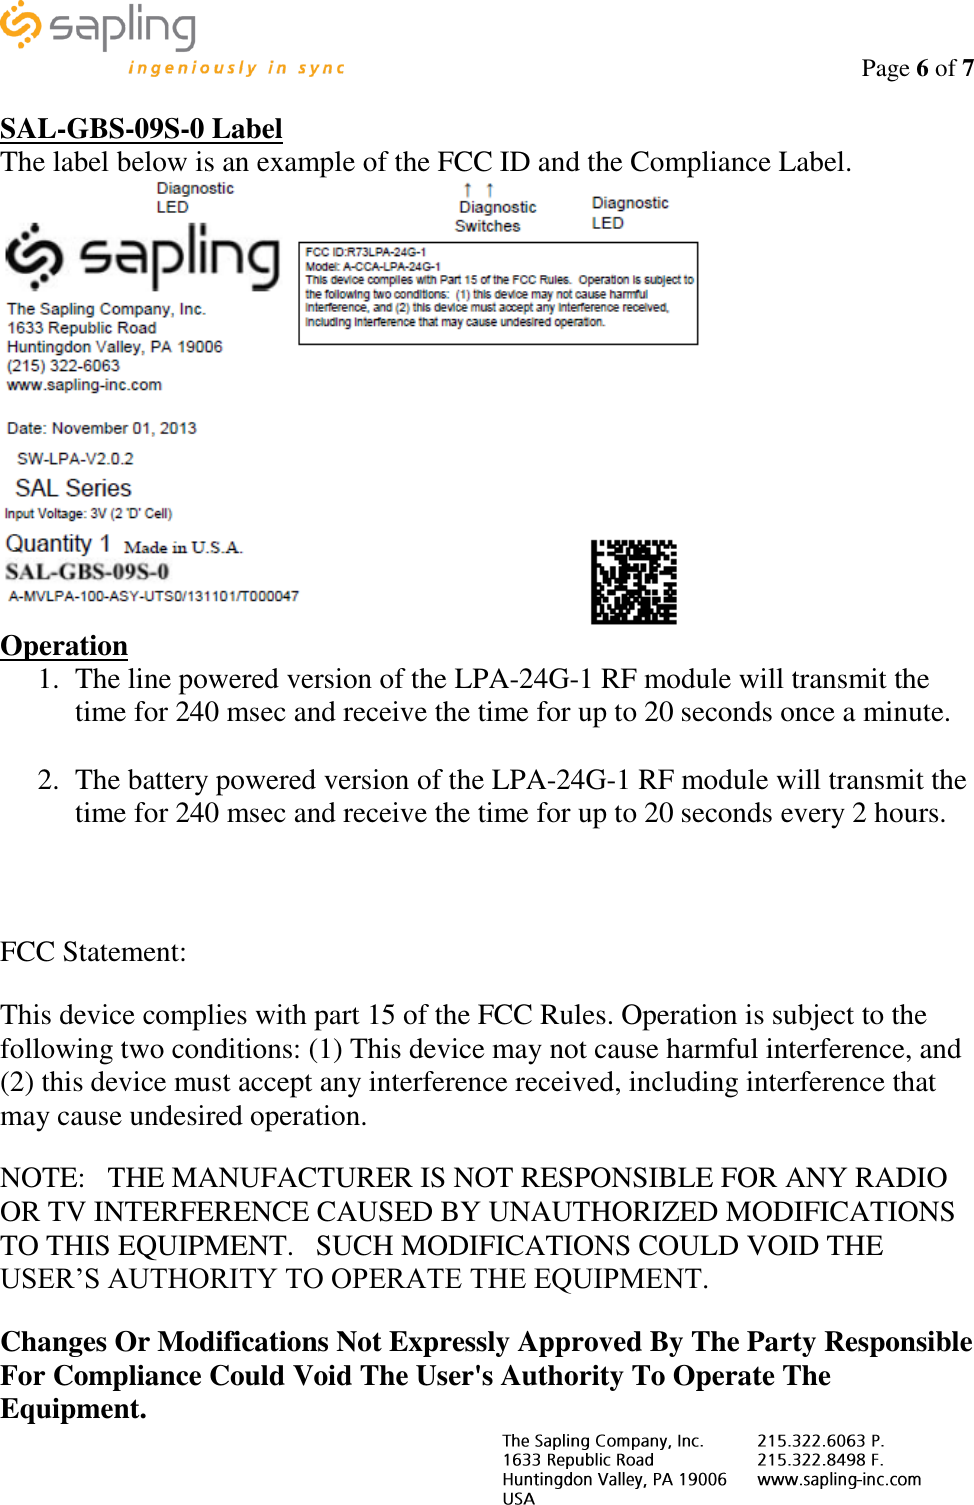                                                                                    Page 6 of 7     SAL-GBS-09S-0 Label The label below is an example of the FCC ID and the Compliance Label.  Operation 1. The line powered version of the LPA-24G-1 RF module will transmit the time for 240 msec and receive the time for up to 20 seconds once a minute.  2. The battery powered version of the LPA-24G-1 RF module will transmit the time for 240 msec and receive the time for up to 20 seconds every 2 hours.   FCC Statement: This device complies with part 15 of the FCC Rules. Operation is subject to the following two conditions: (1) This device may not cause harmful interference, and (2) this device must accept any interference received, including interference that may cause undesired operation. NOTE:   THE MANUFACTURER IS NOT RESPONSIBLE FOR ANY RADIO OR TV INTERFERENCE CAUSED BY UNAUTHORIZED MODIFICATIONS TO THIS EQUIPMENT.   SUCH MODIFICATIONS COULD VOID THE USER’S AUTHORITY TO OPERATE THE EQUIPMENT. Changes Or Modifications Not Expressly Approved By The Party Responsible For Compliance Could Void The User&apos;s Authority To Operate The Equipment. 